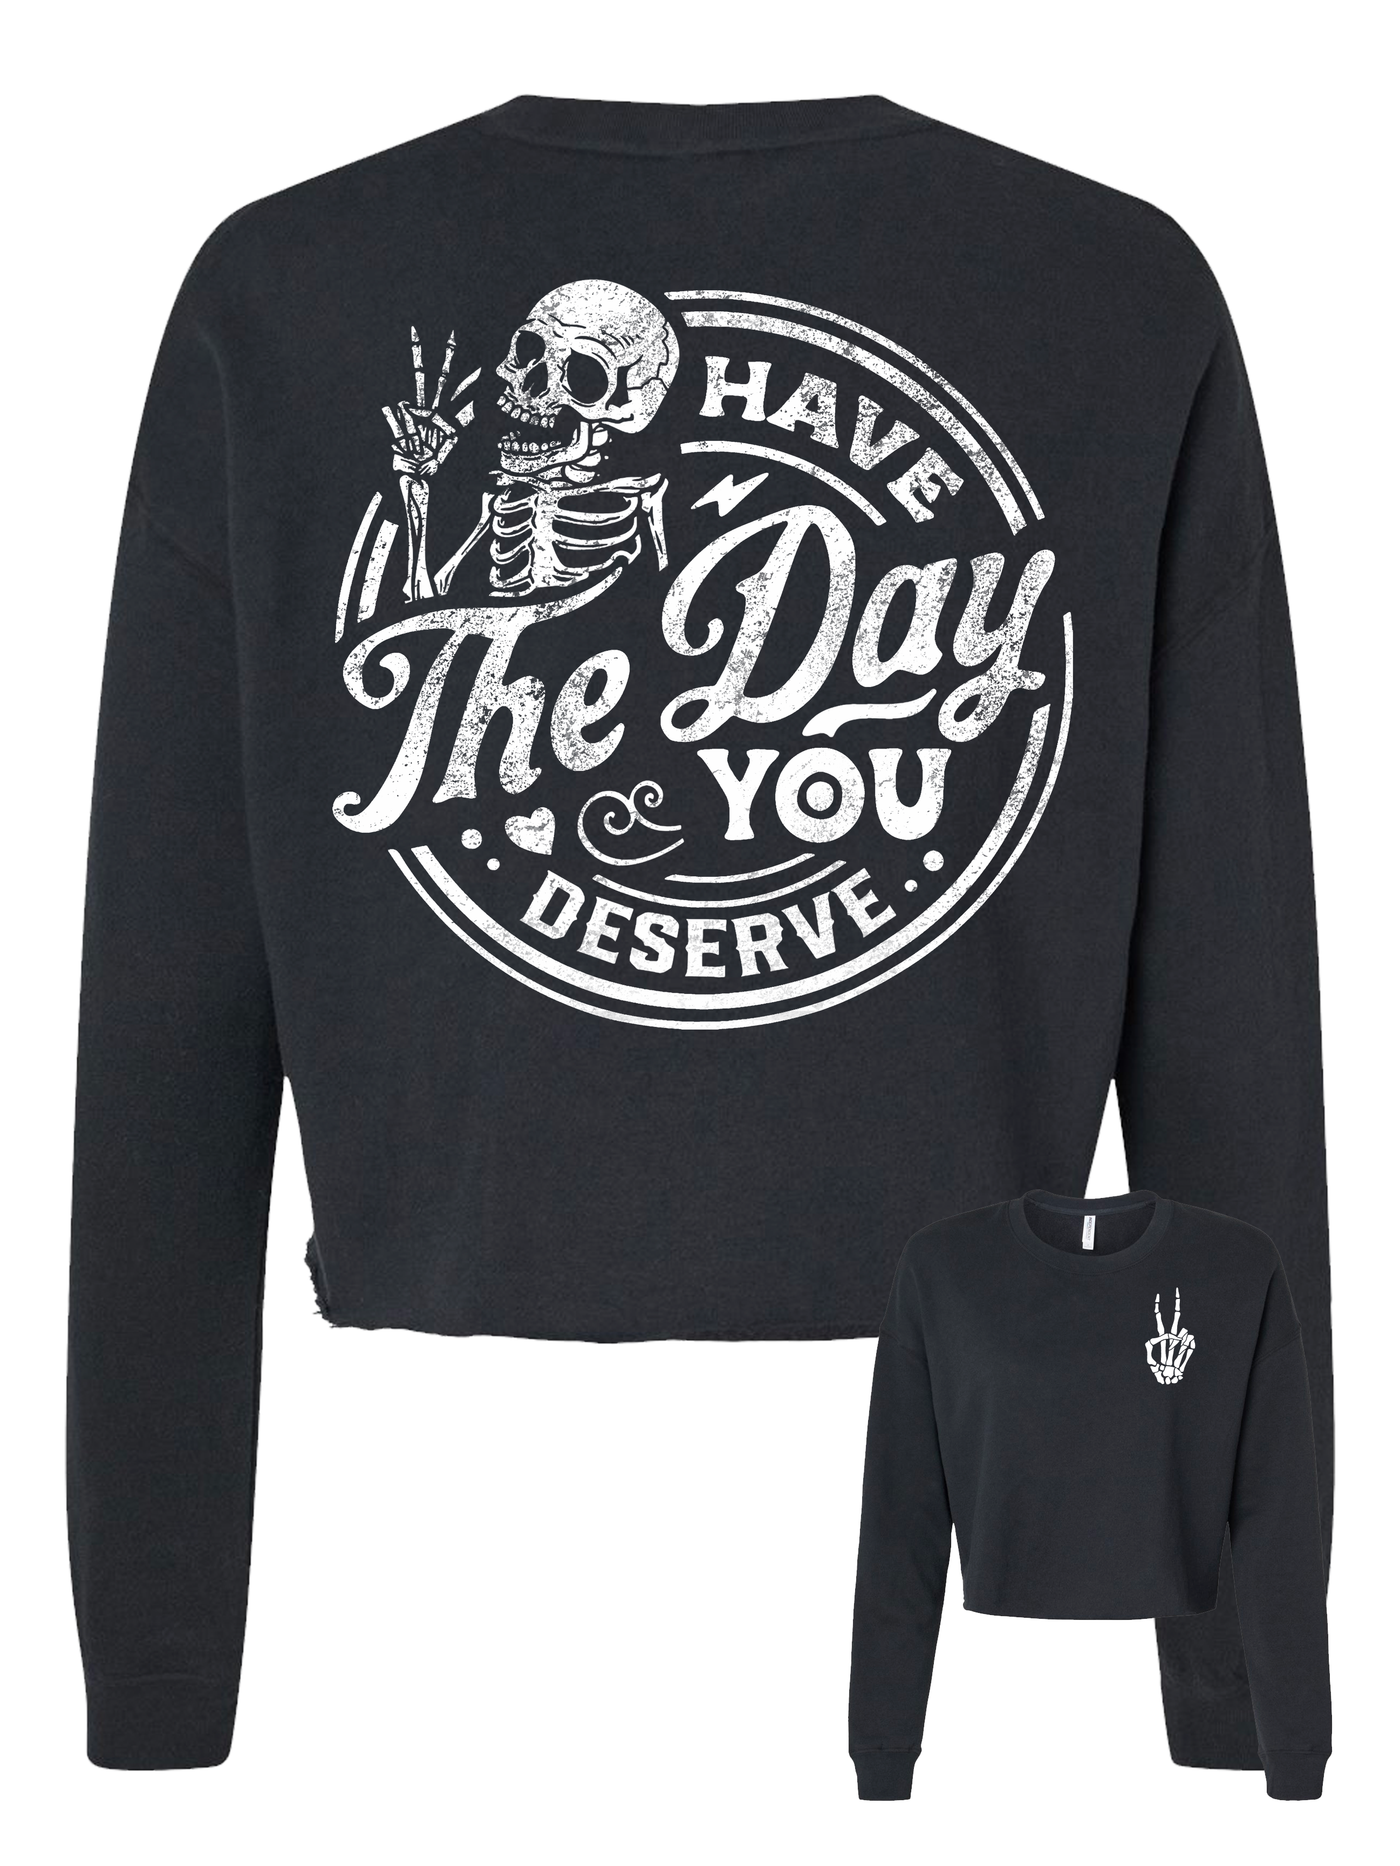 New Have The Day You Deserve Black & White Tee/Sweatshirt